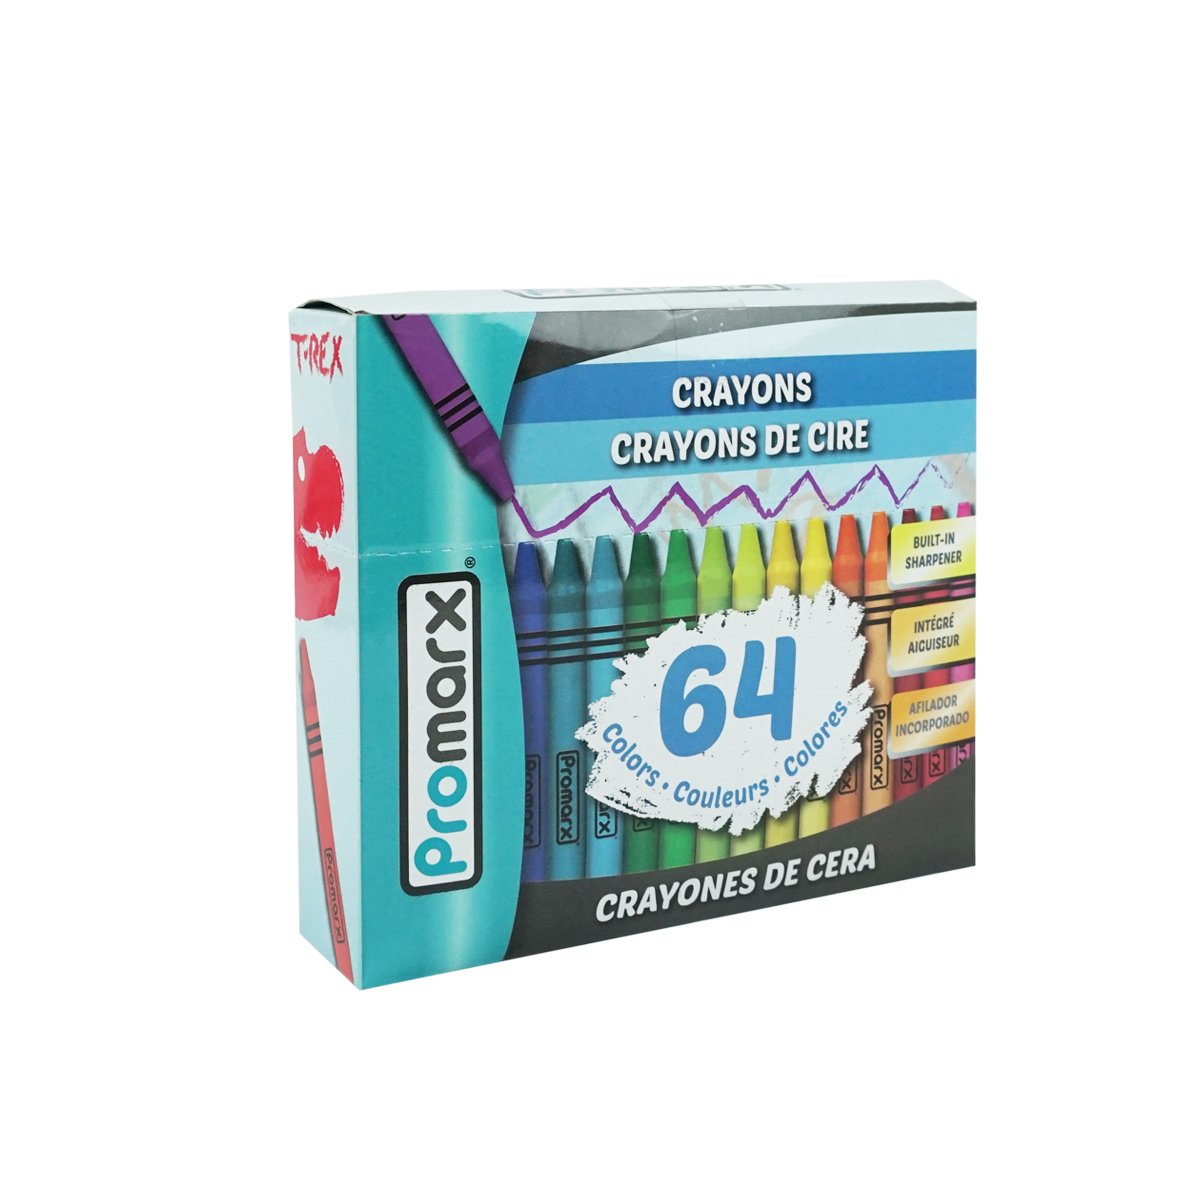 975 Supply 24 Pack Crayons, Classic Colors, Crayons For Kids, School  Crayons, Assorted Colors - 24 Crayons Per Box - 1 Box